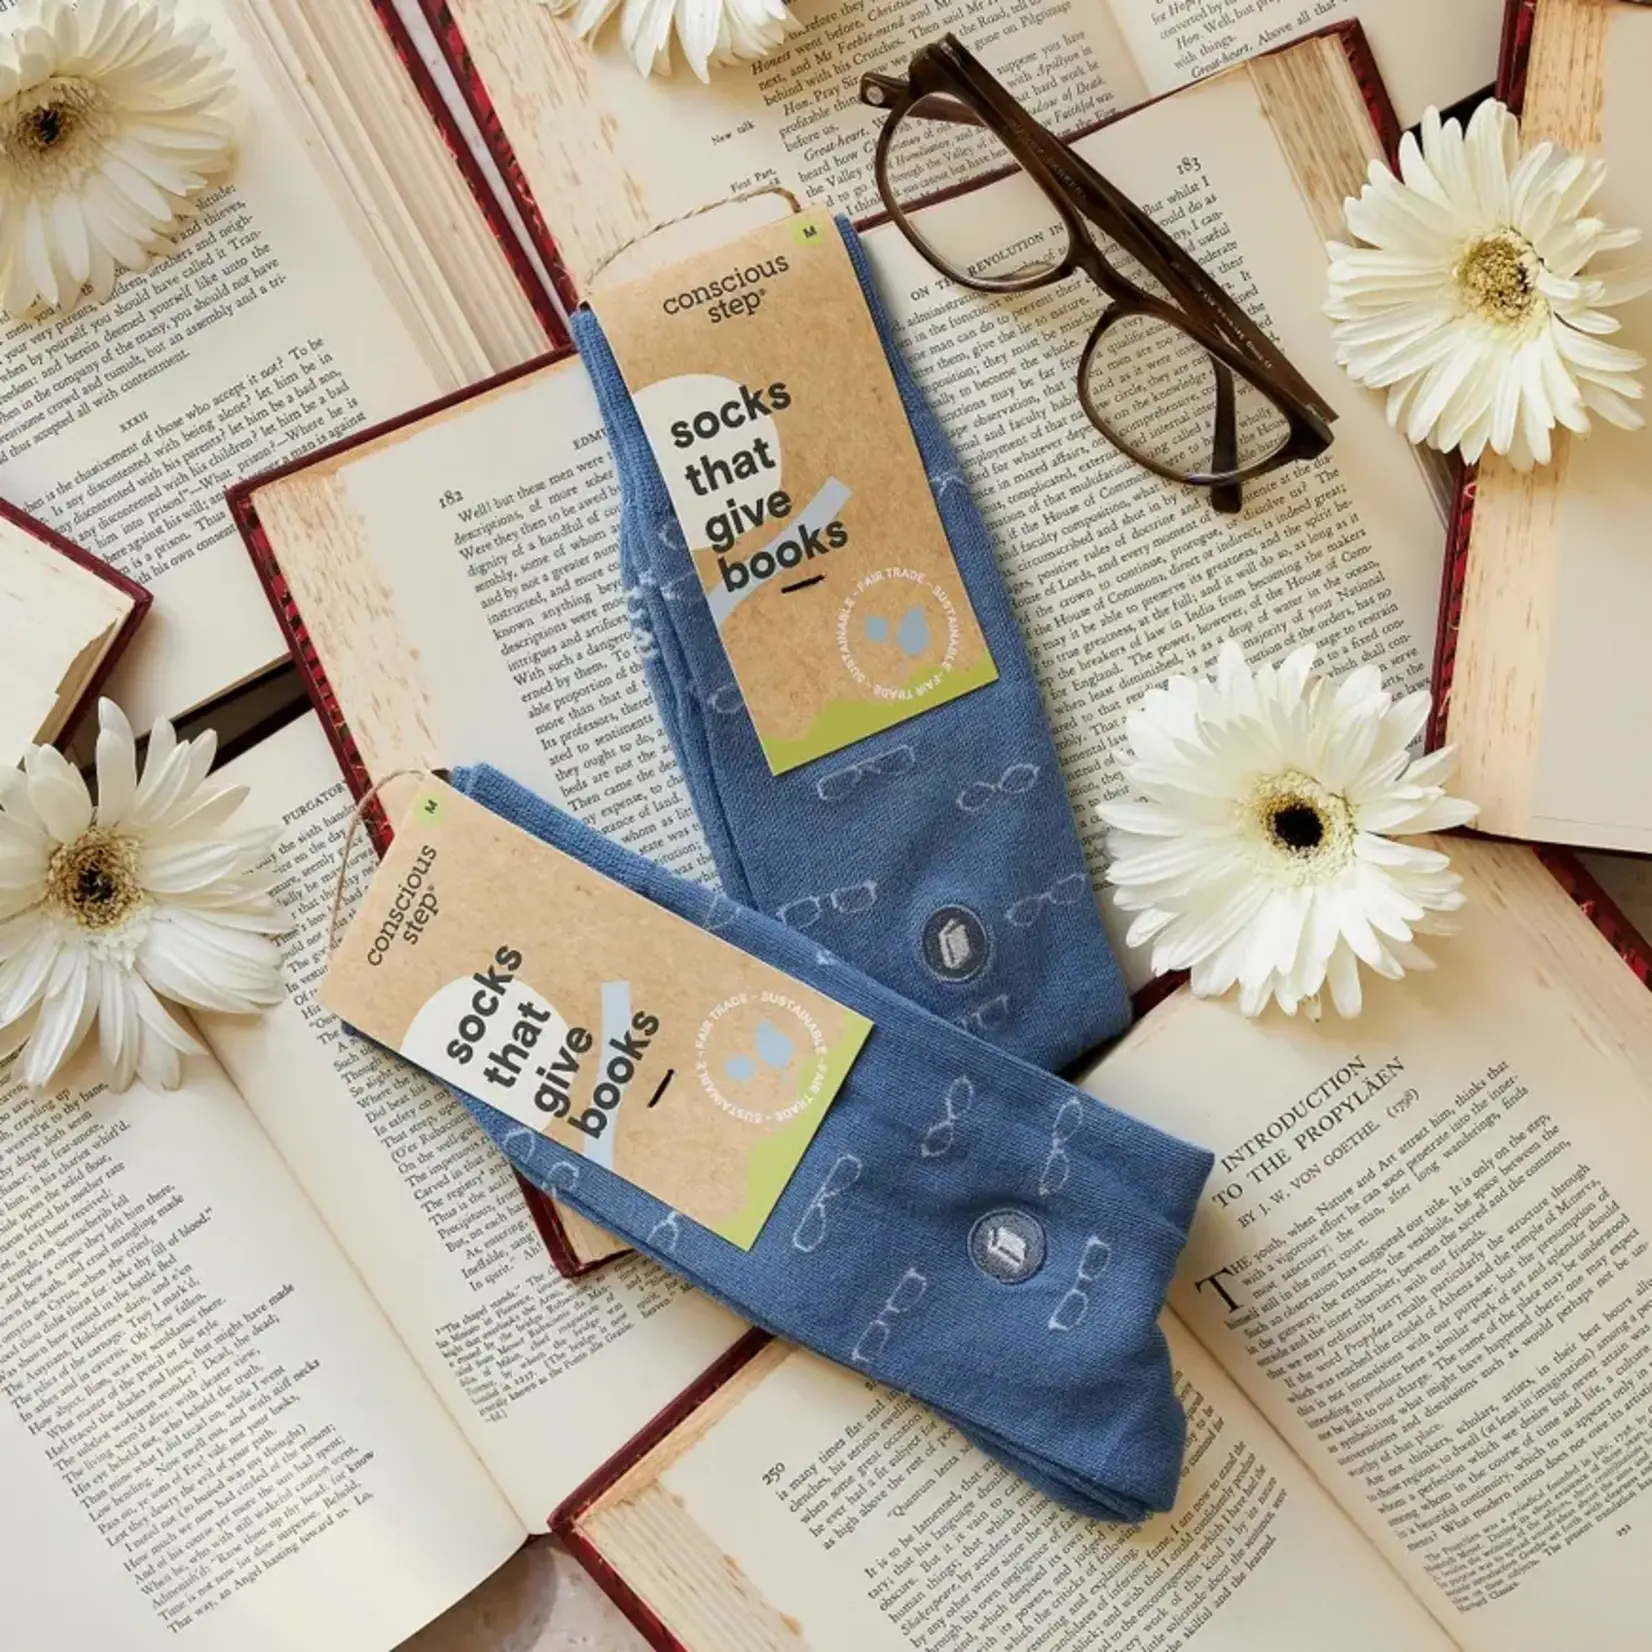 Socks that Give Books (Blue Glasses) - Small